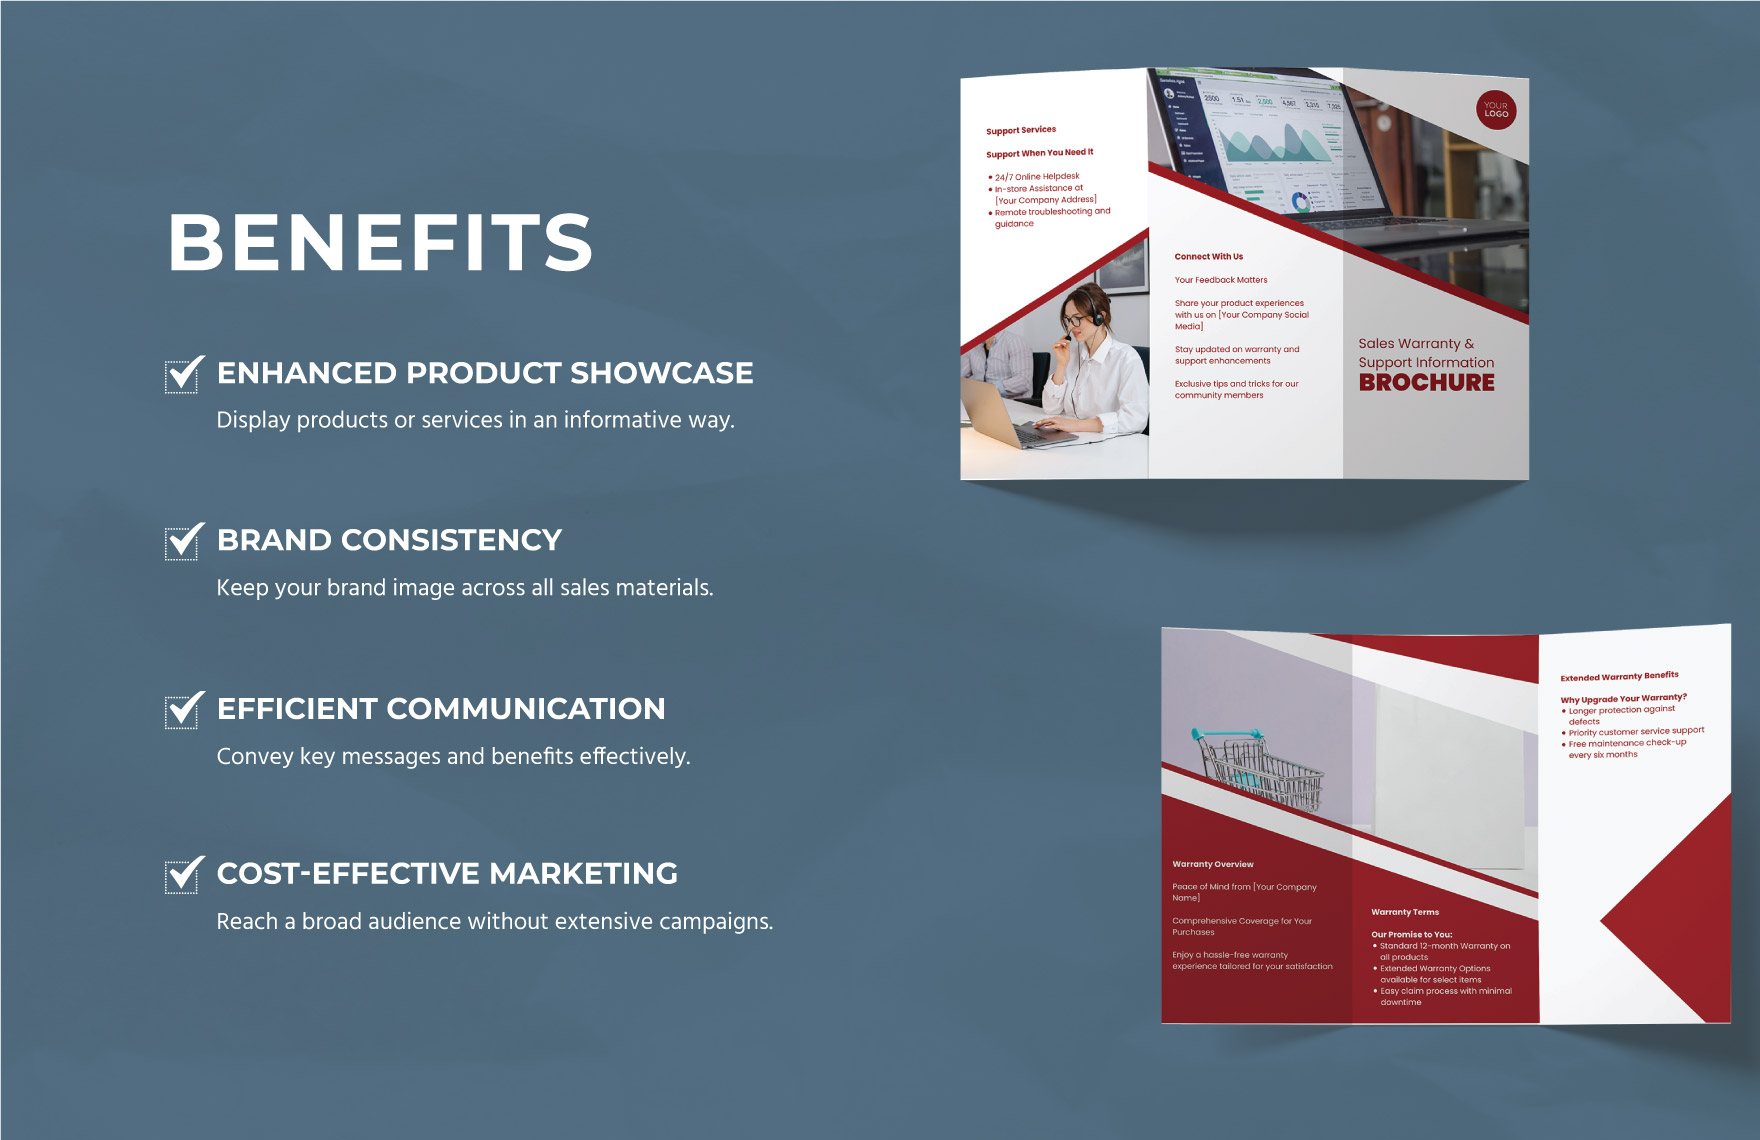 Sales Warranty and Support Information Brochure Template